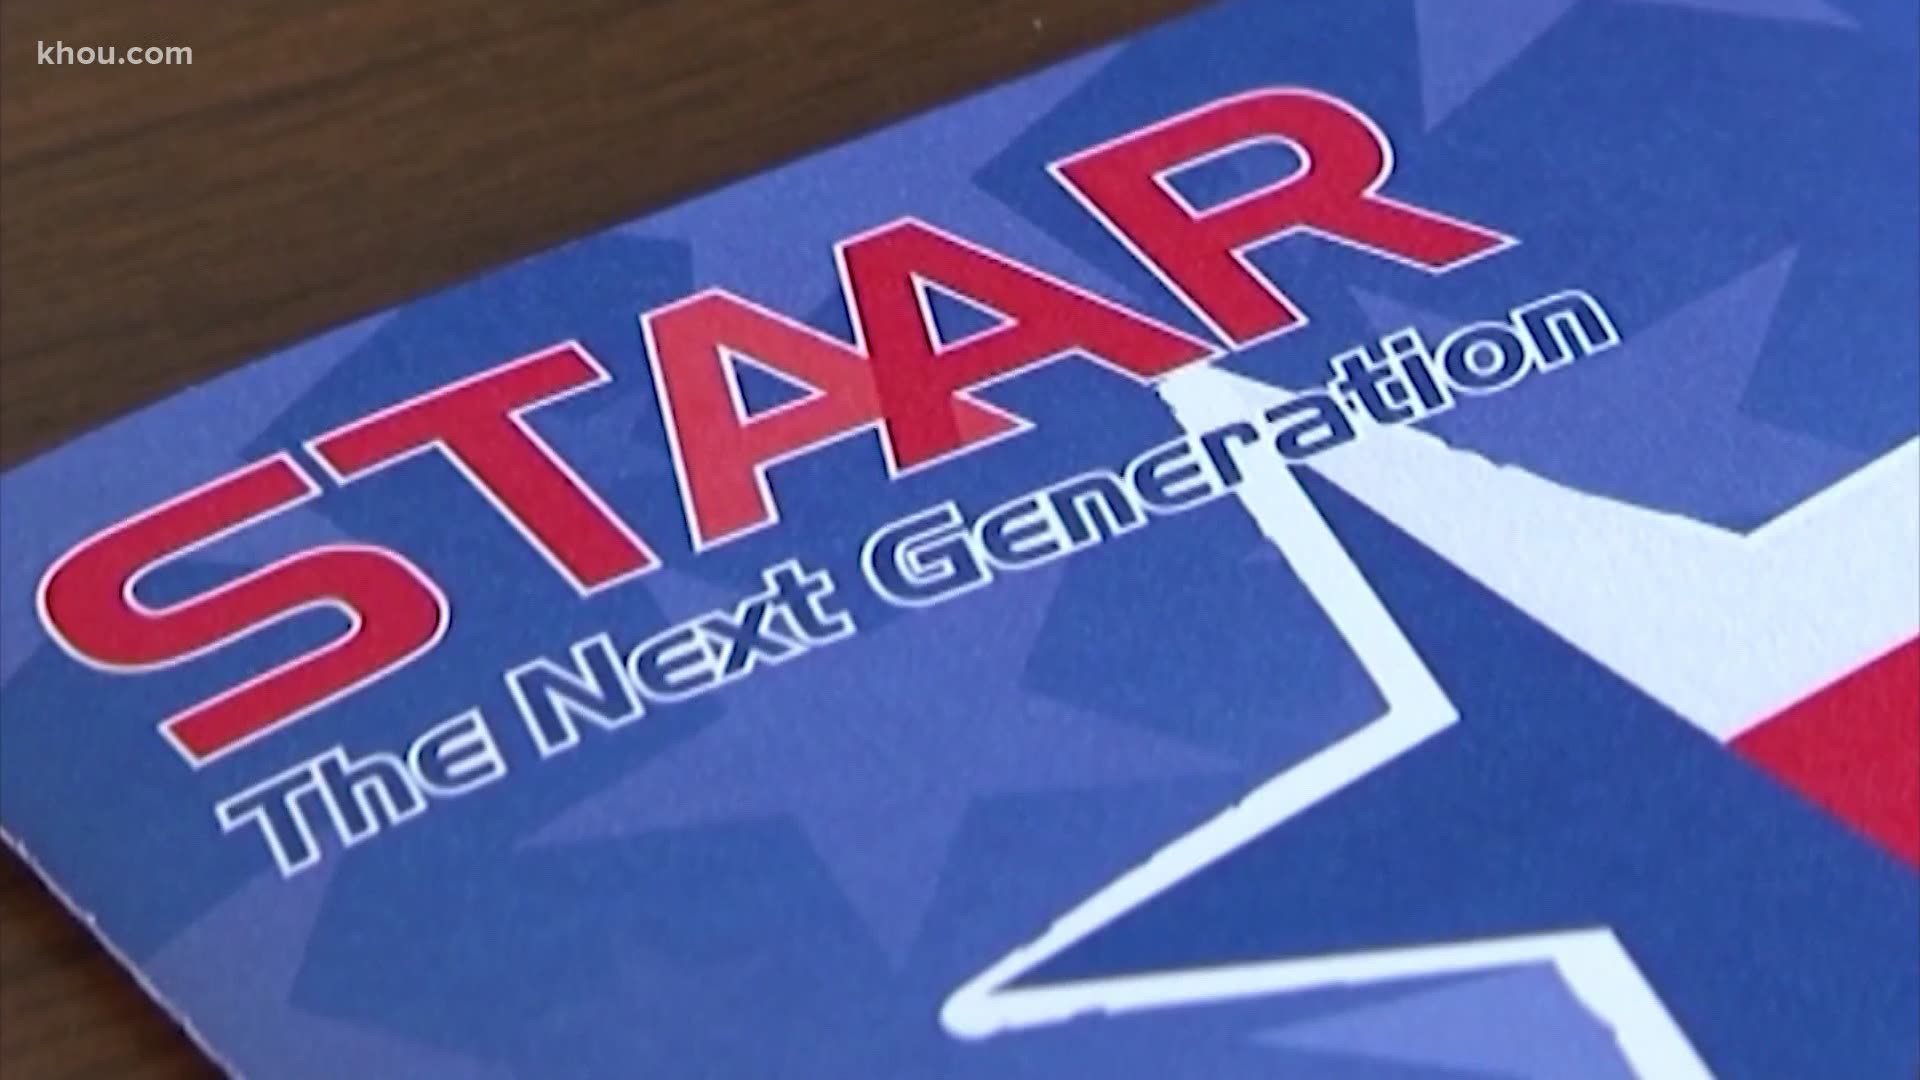 Younger students will not need to pass the STAAR test to advance to the next grade level this upcoming school year, Gov. Greg Abbott announced.